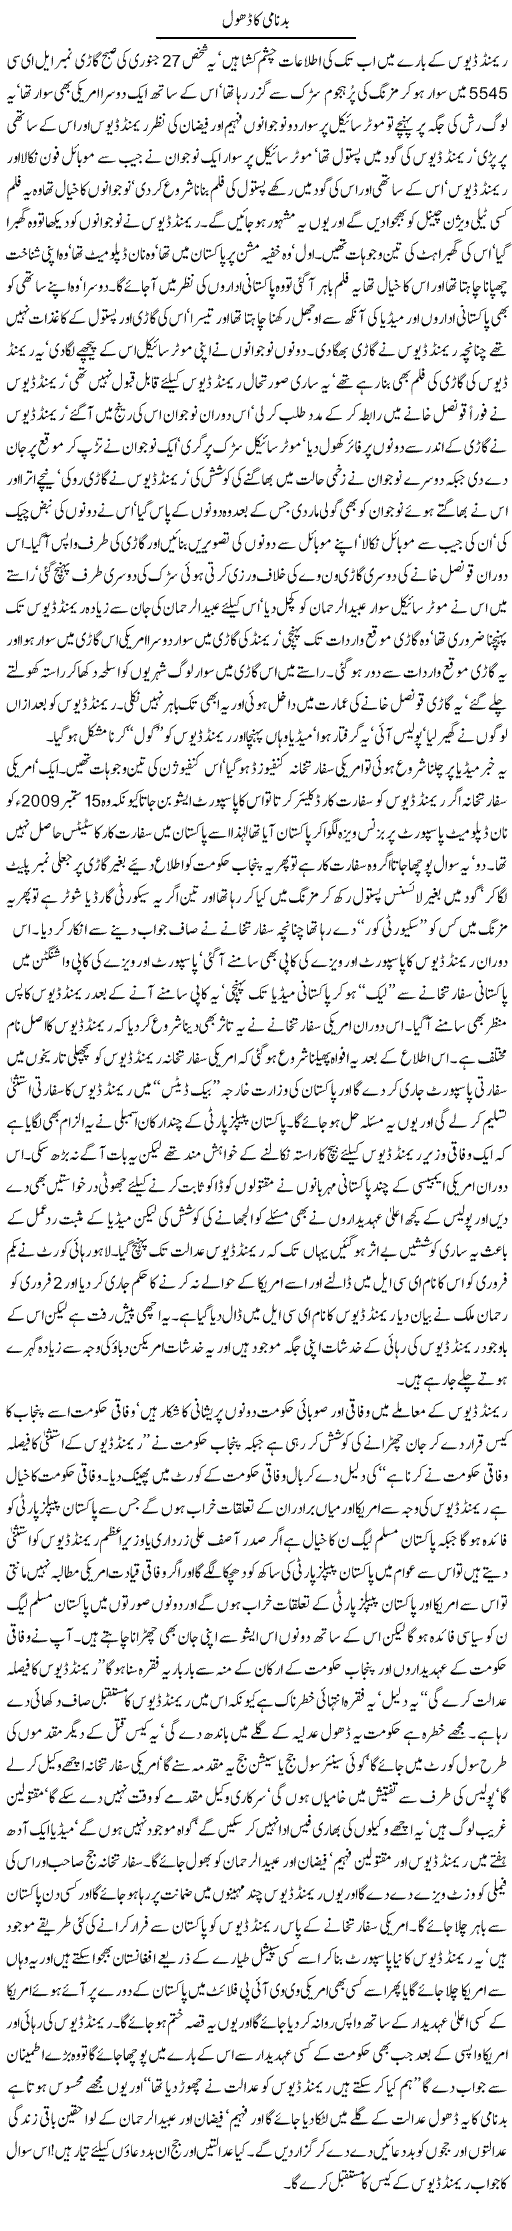 American Agent Raymond Express Column Javed Chaudhry 3 February 2011